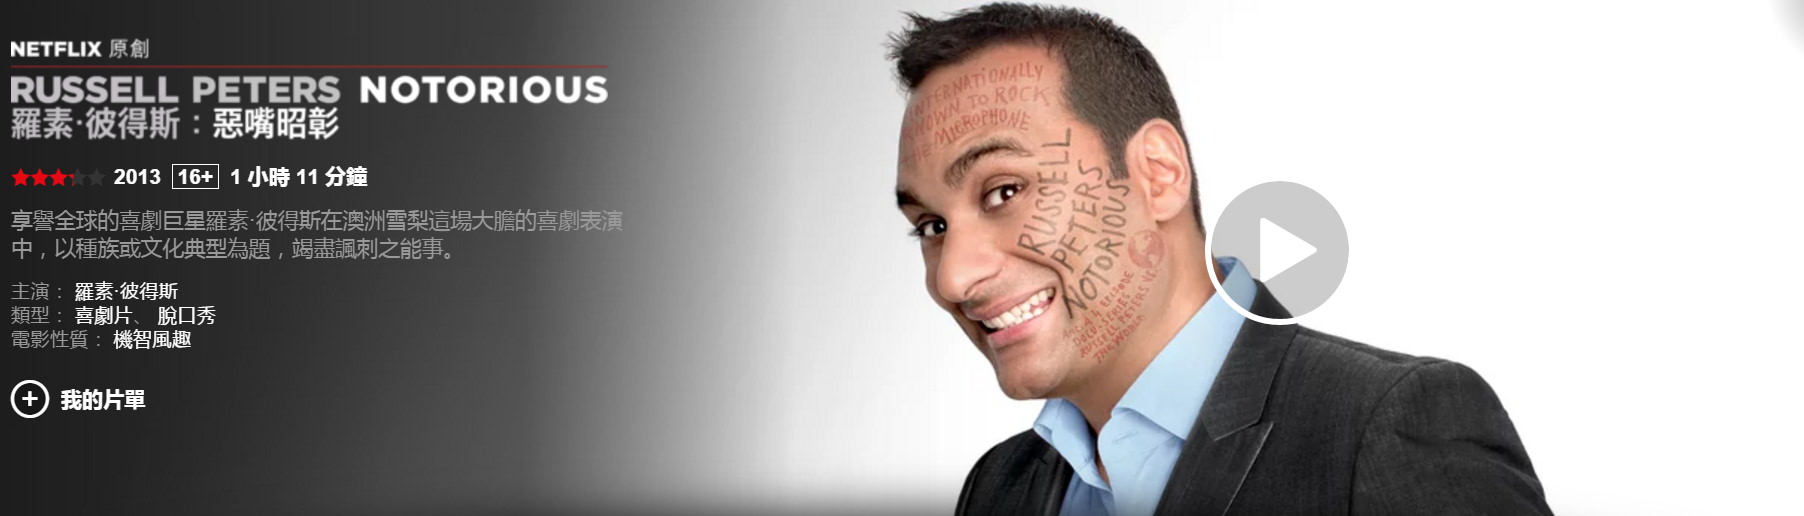 05_russell_peters